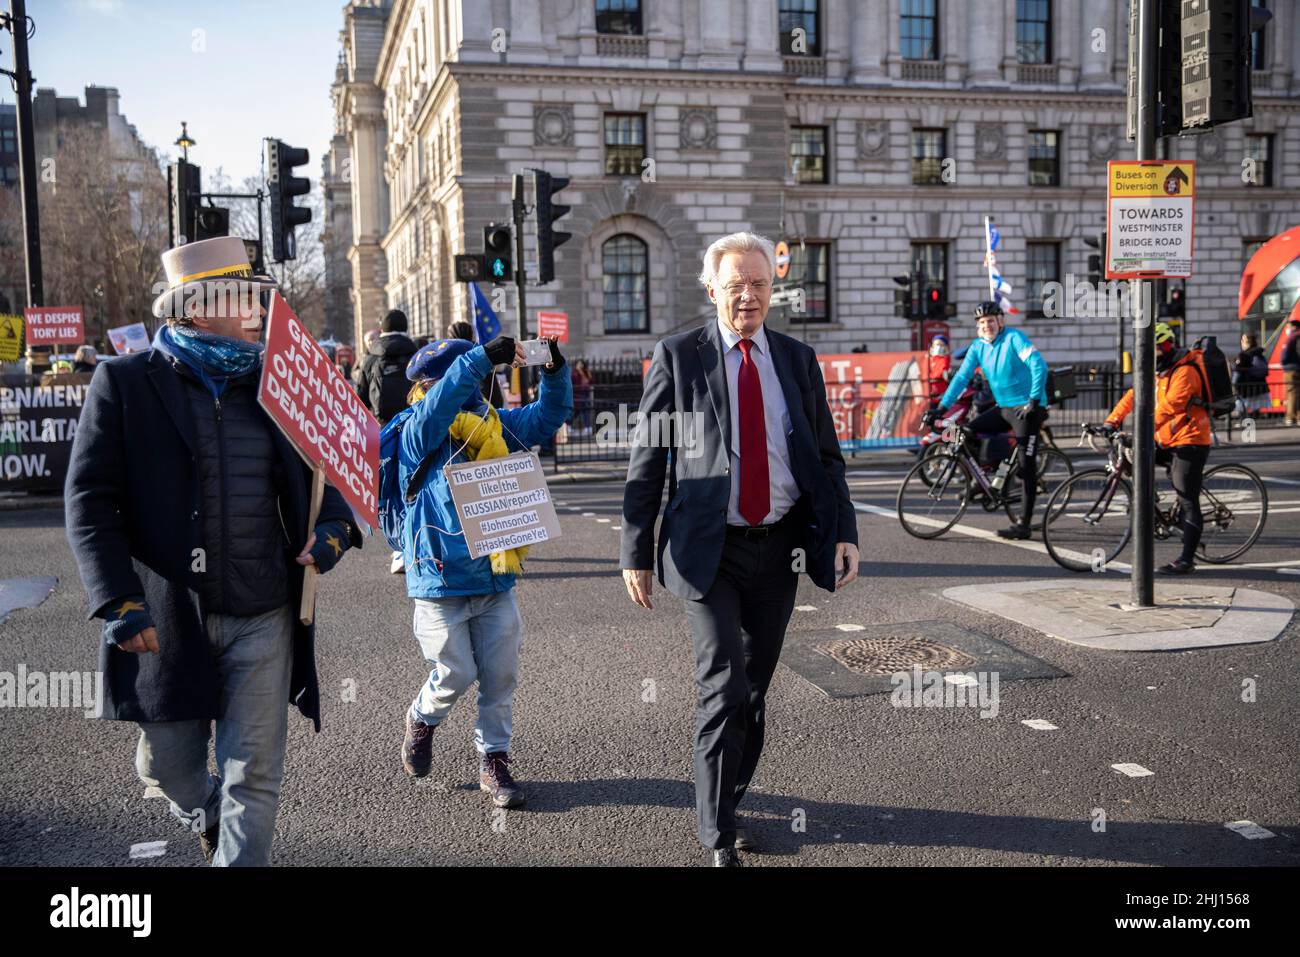 Protesters target Conservative MP David Davis outside Houses of parliament on the day that Boris Johnson faces further demands to resign, London, UK Whitehall, London, England, UK 26th January 2022 Credit: Jeff Gilbert/Alamy Live News Stock Photo